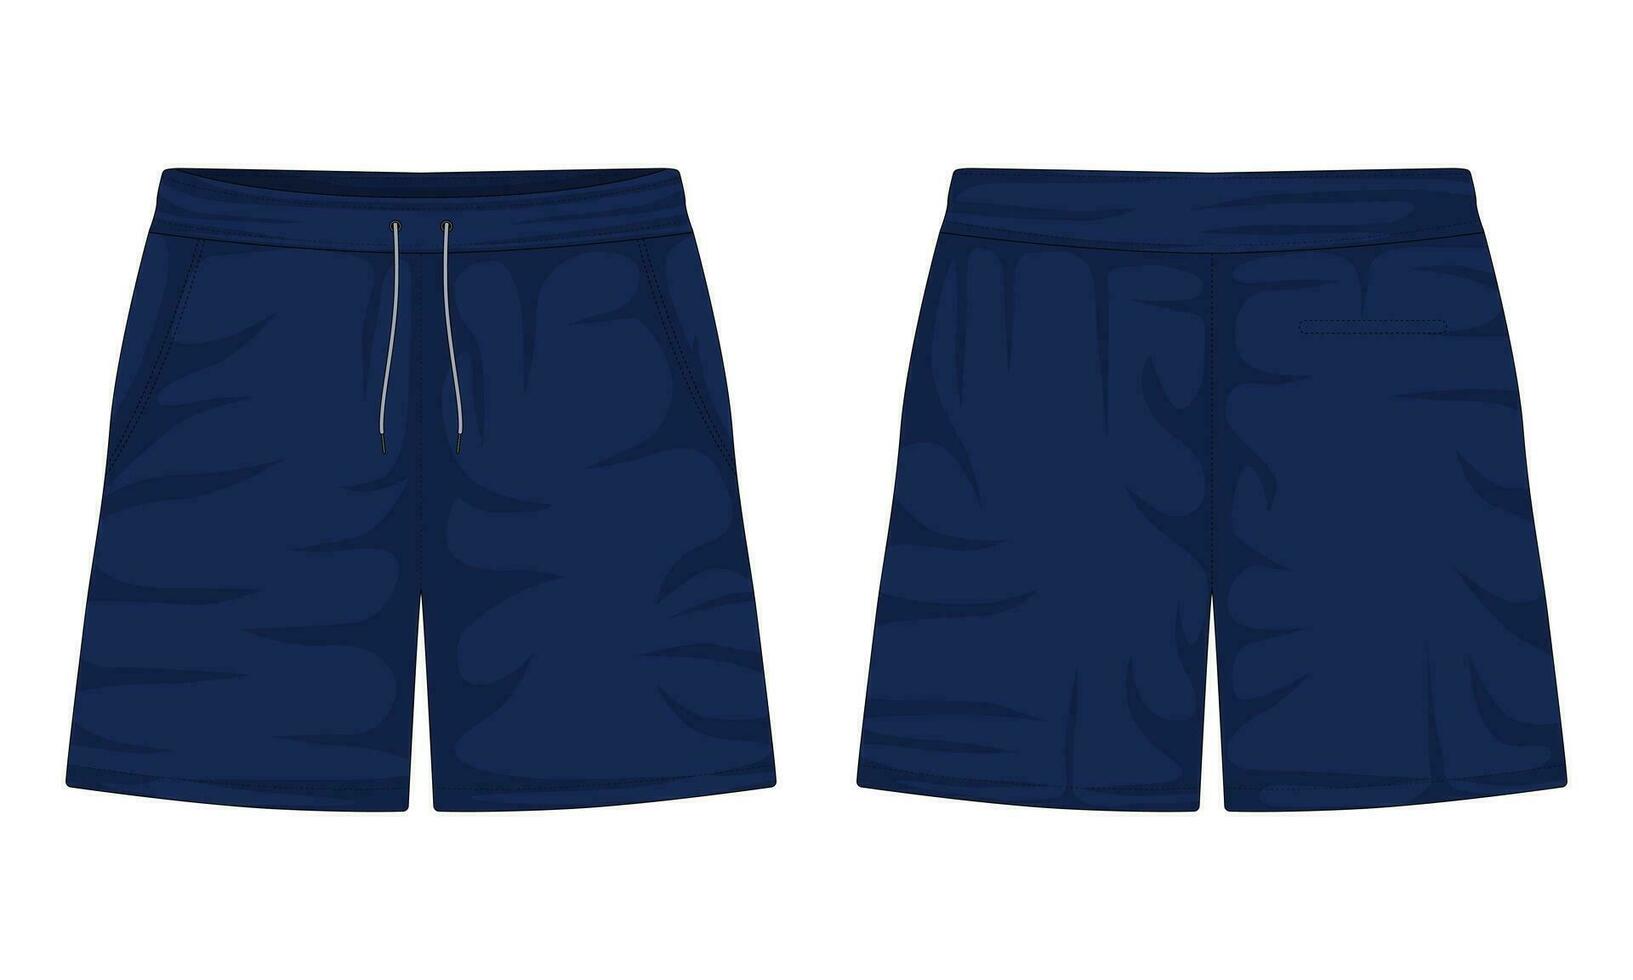 Sweatpants front and back view. Sports shorts. Navy blue casual shorts. Vector illustration